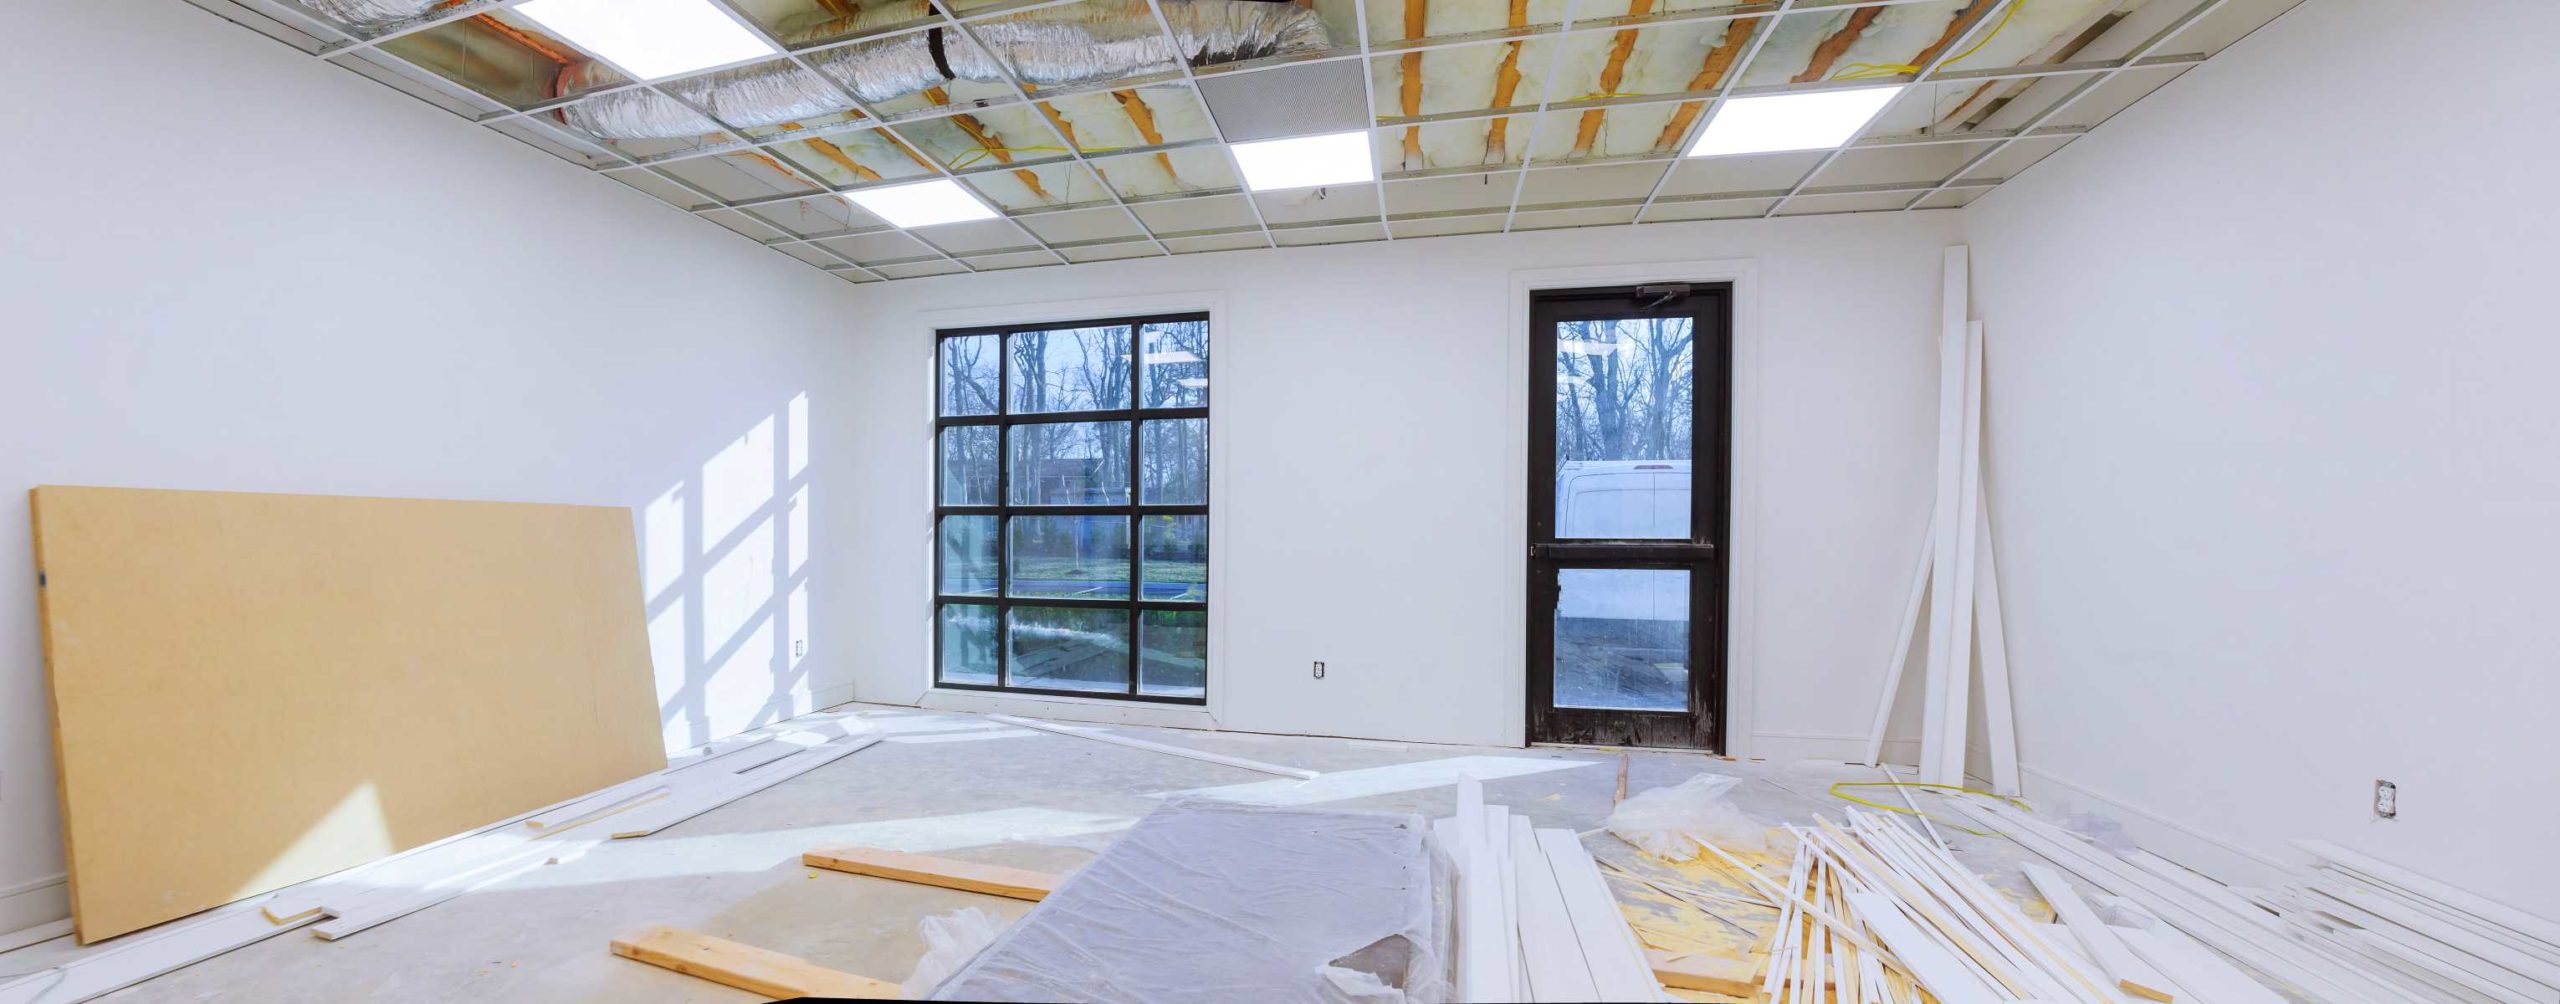 Acoustical Suspended Ceiling and Drywall